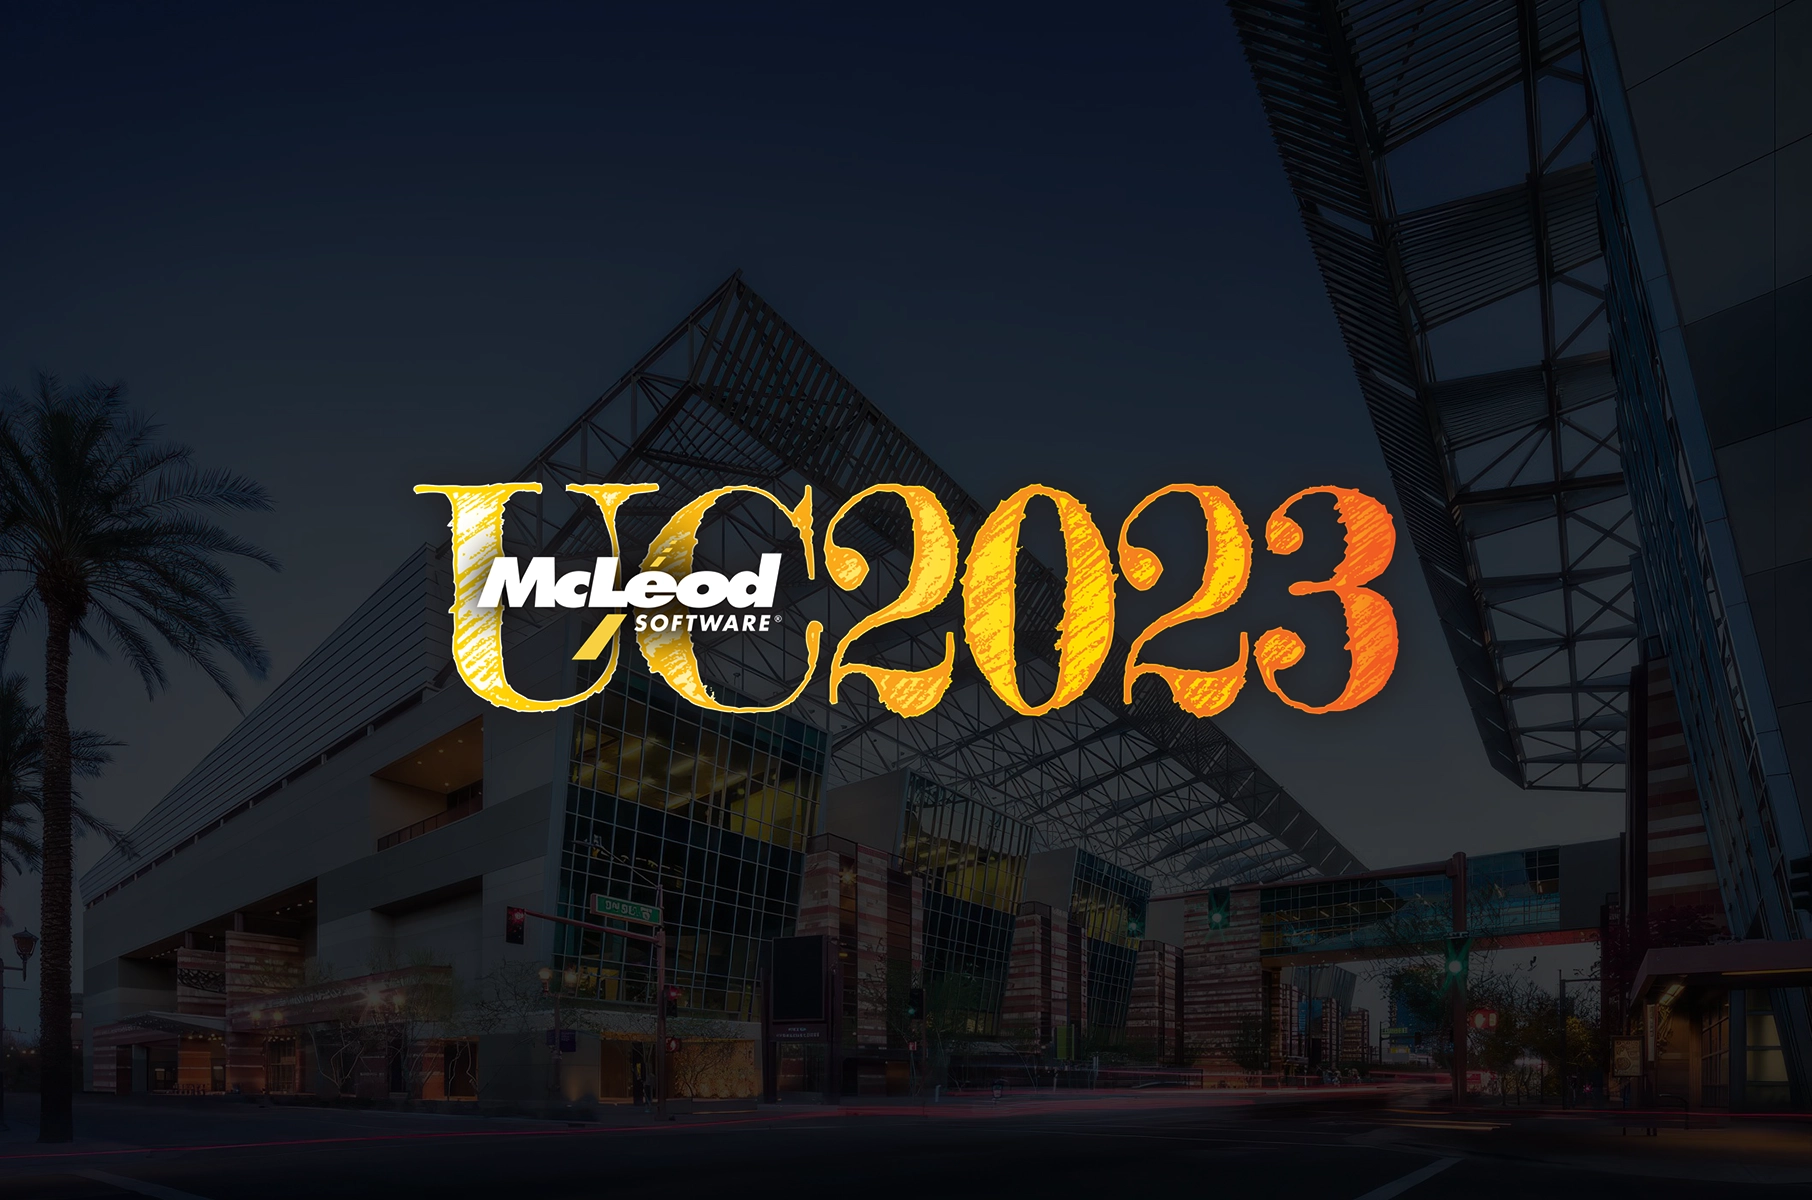 Descartes MacroPoint at the Mcleod Software User Conference 2023